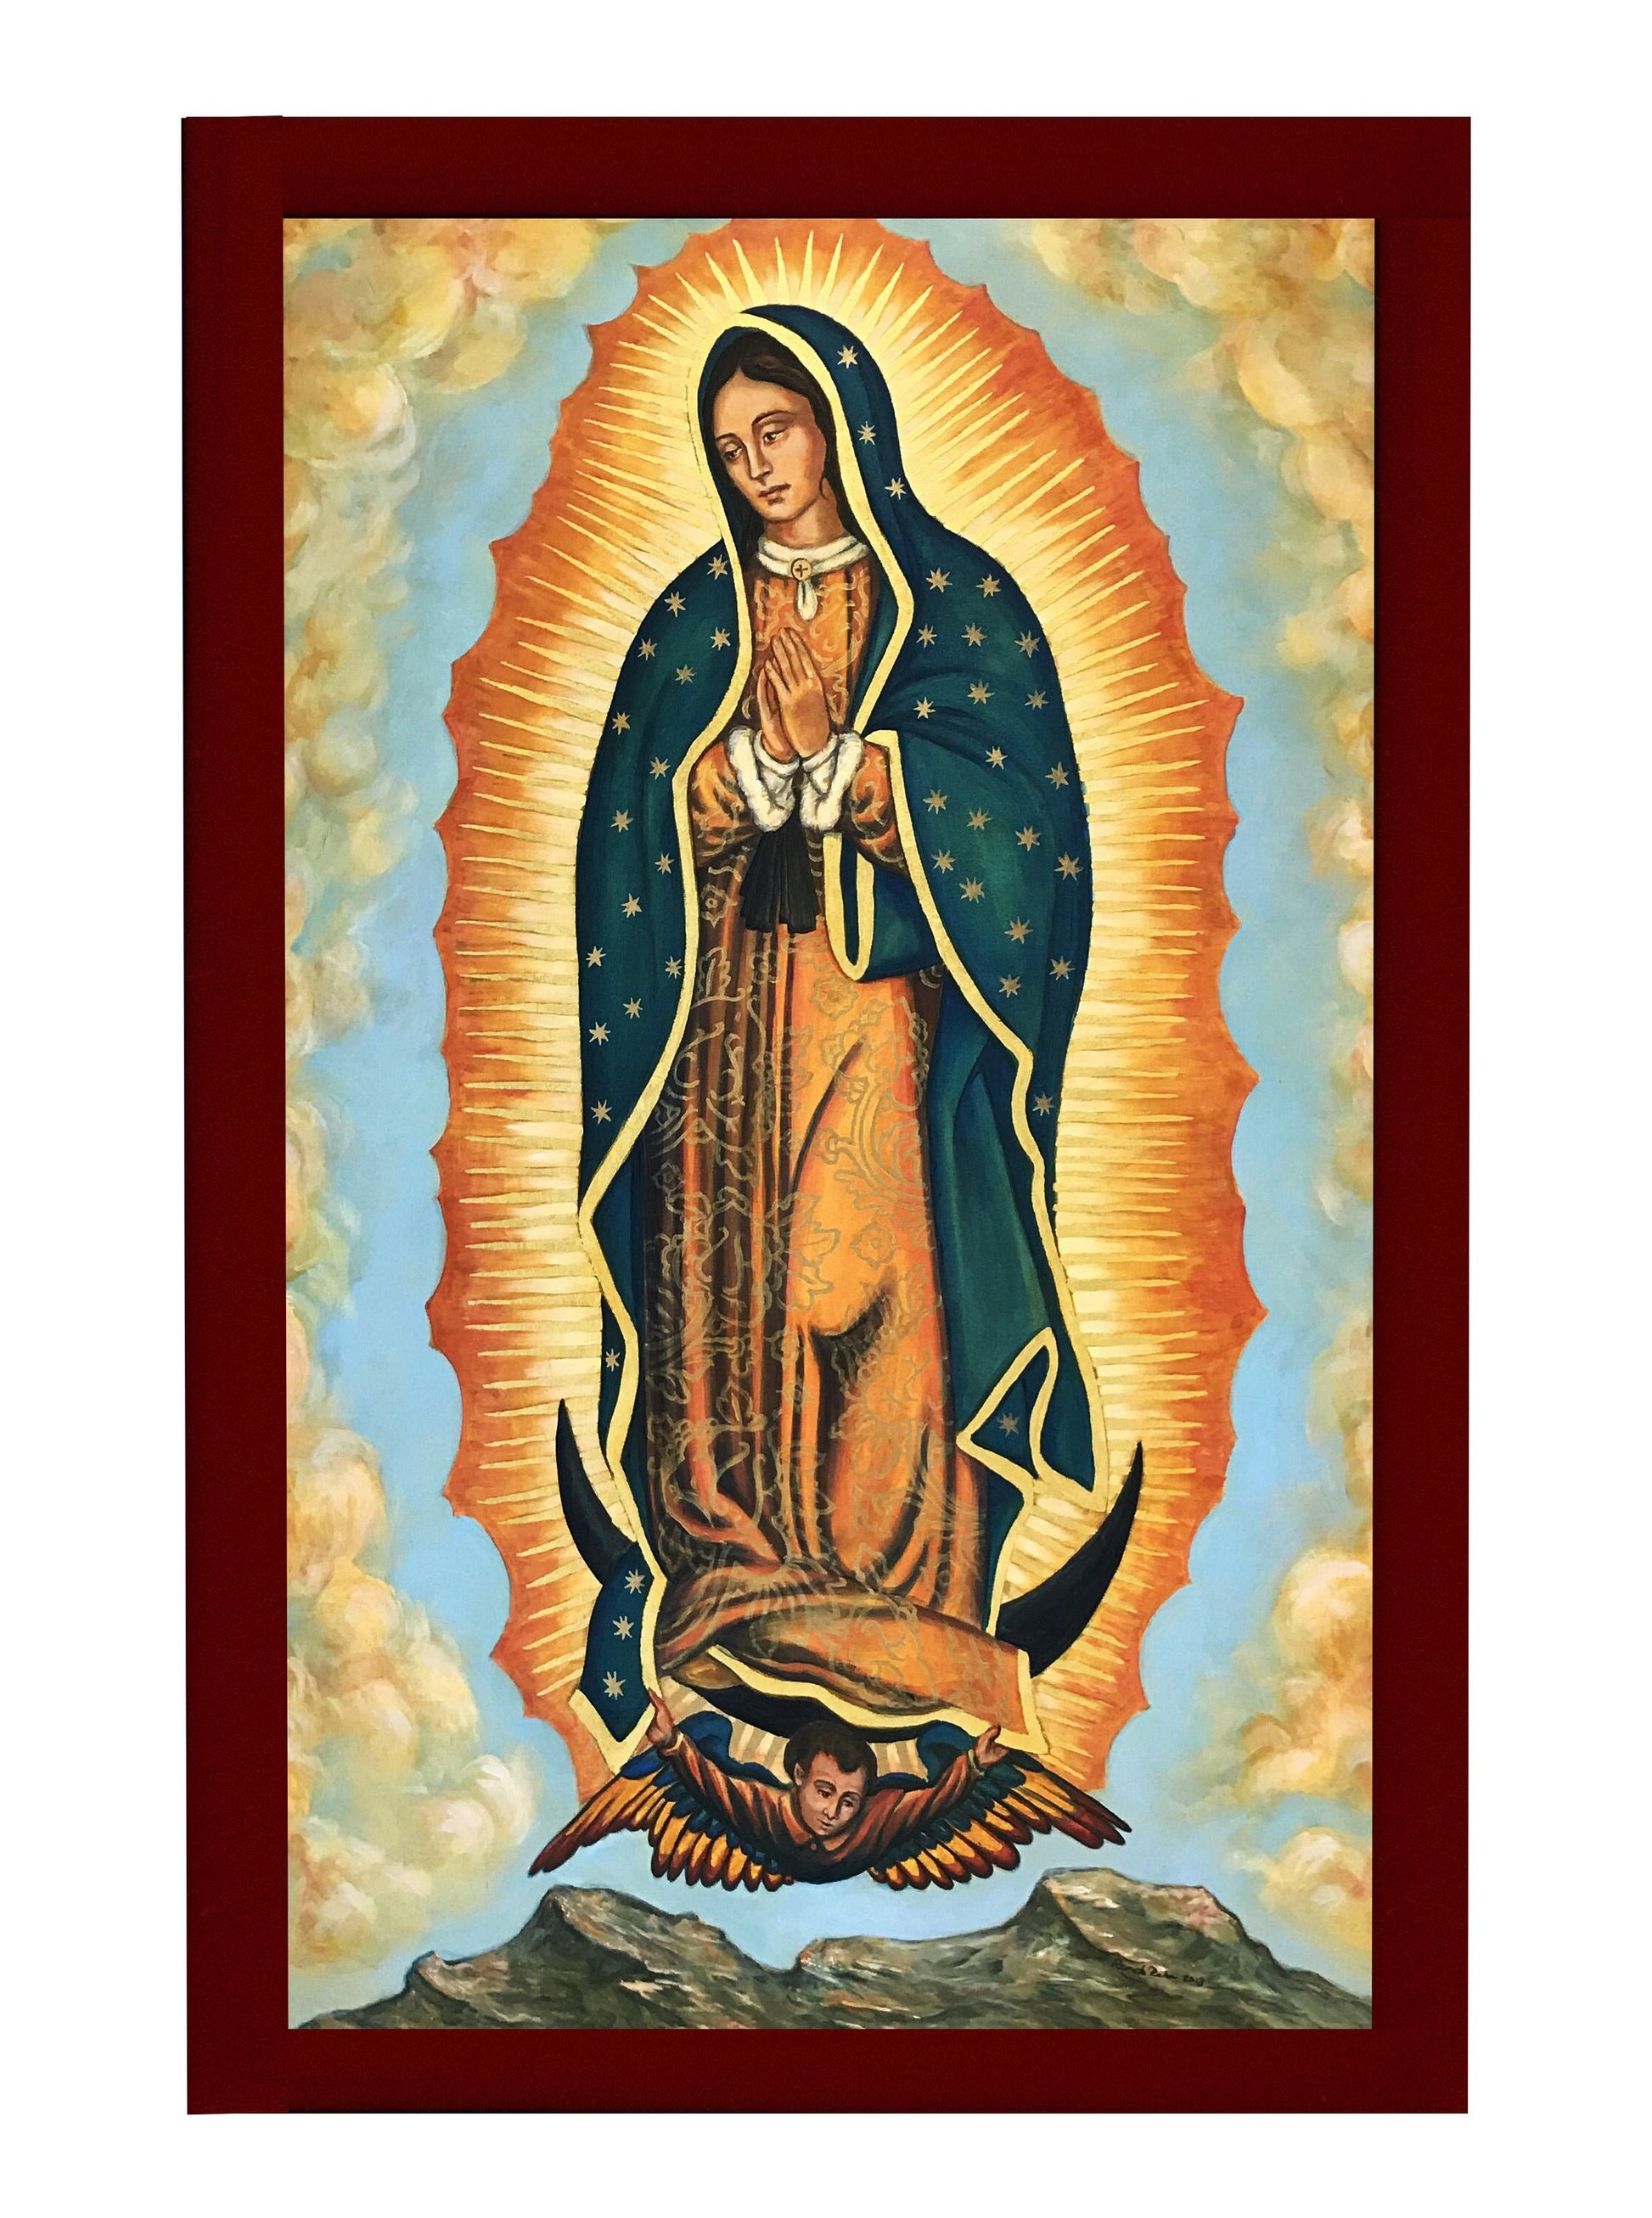 Our Lady of Guadalupe icon, Handmade Catholic Icon of Virgin Mary de Guadalupe, Mother of God, Theotokos wall hanging wood plaque TheHolyArt